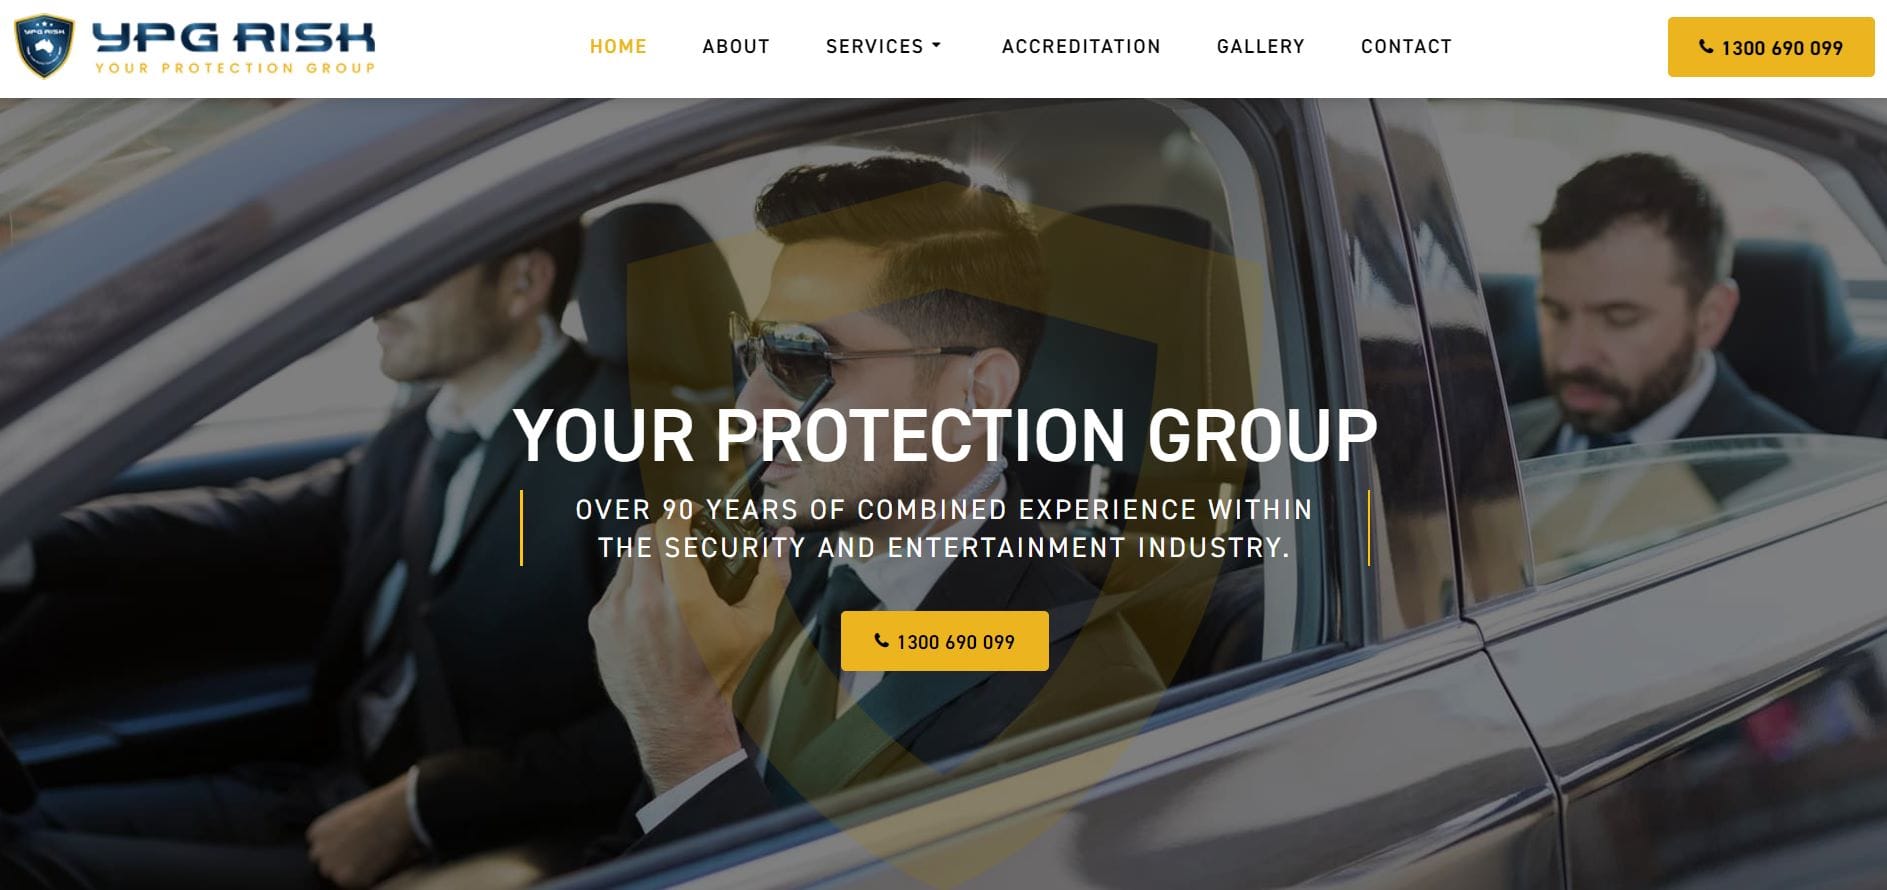 ypg risk security guard company melbourne